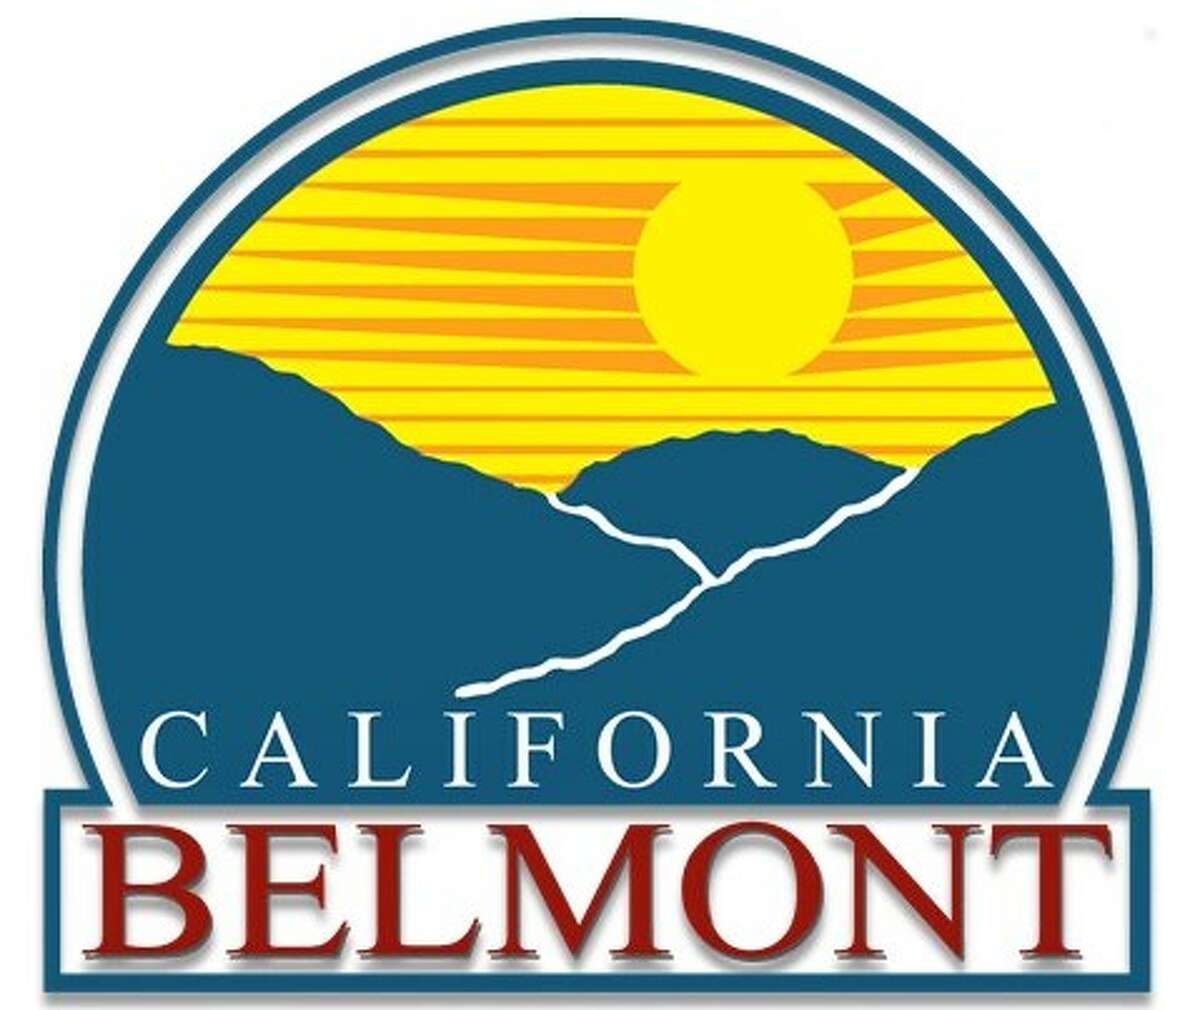 The Belmont, Calif., city logo could be changing in the future, but it won't resemble a classic Pink Floyd rock album.